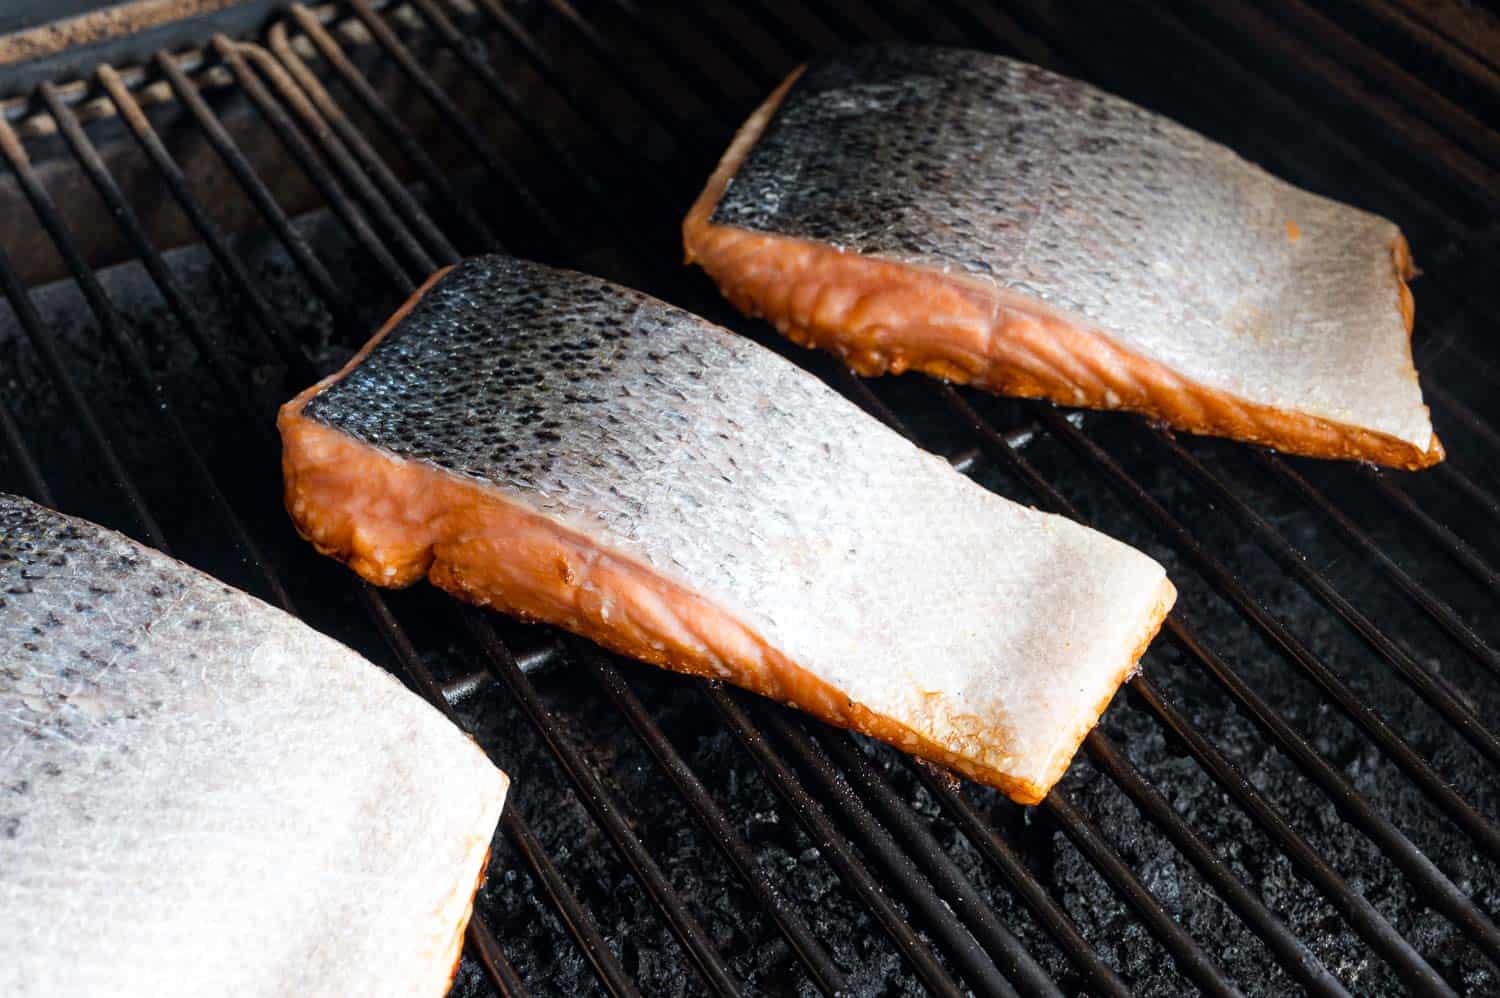 Three salmon fillets grilling skin-side-up on a grill.